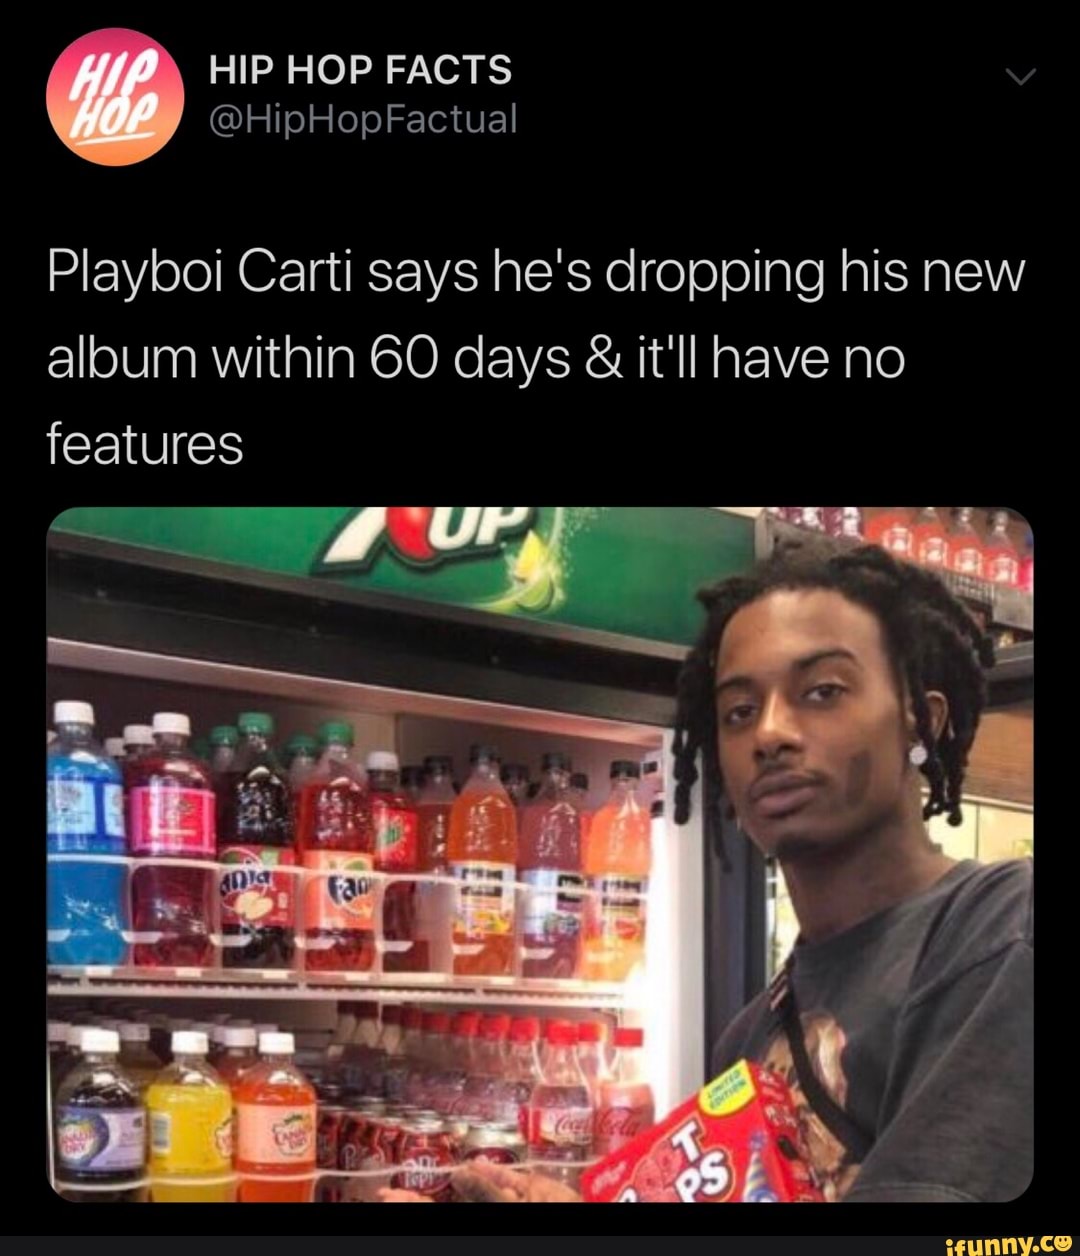 Playboi Carti says he wants his new album to be out in the next 60 days